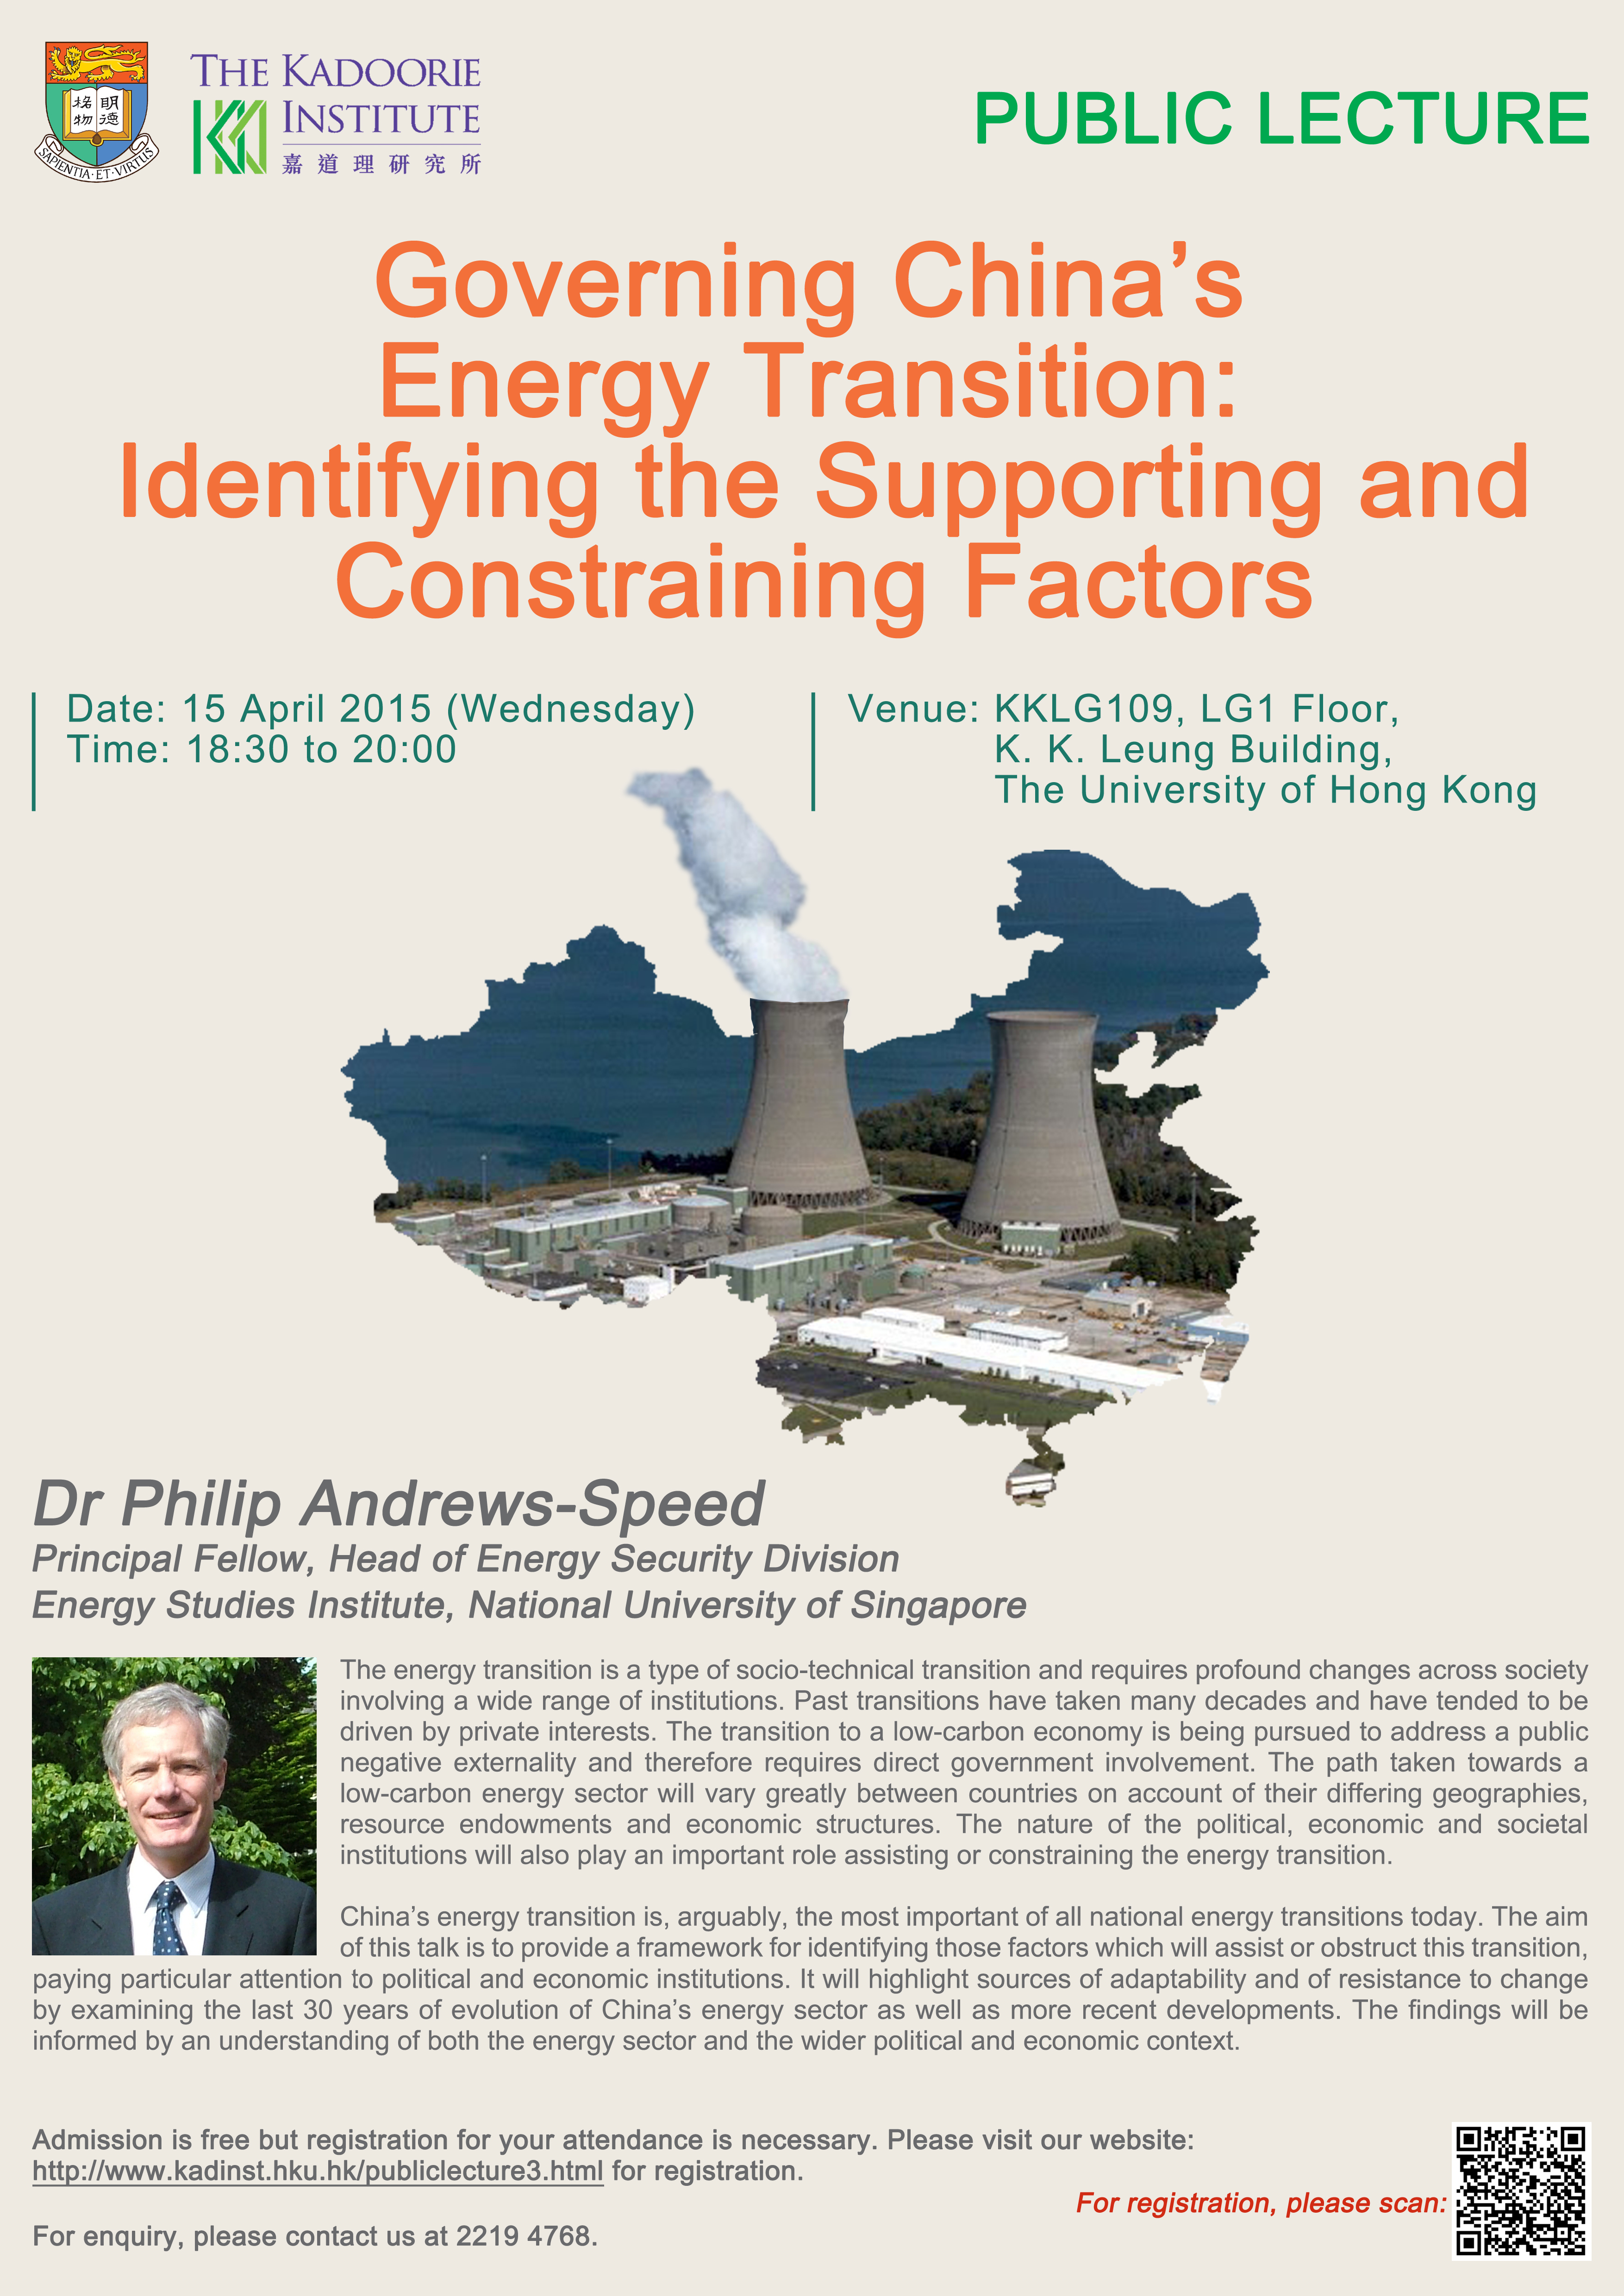 Public Lecture on Governing China’s Energy Transition